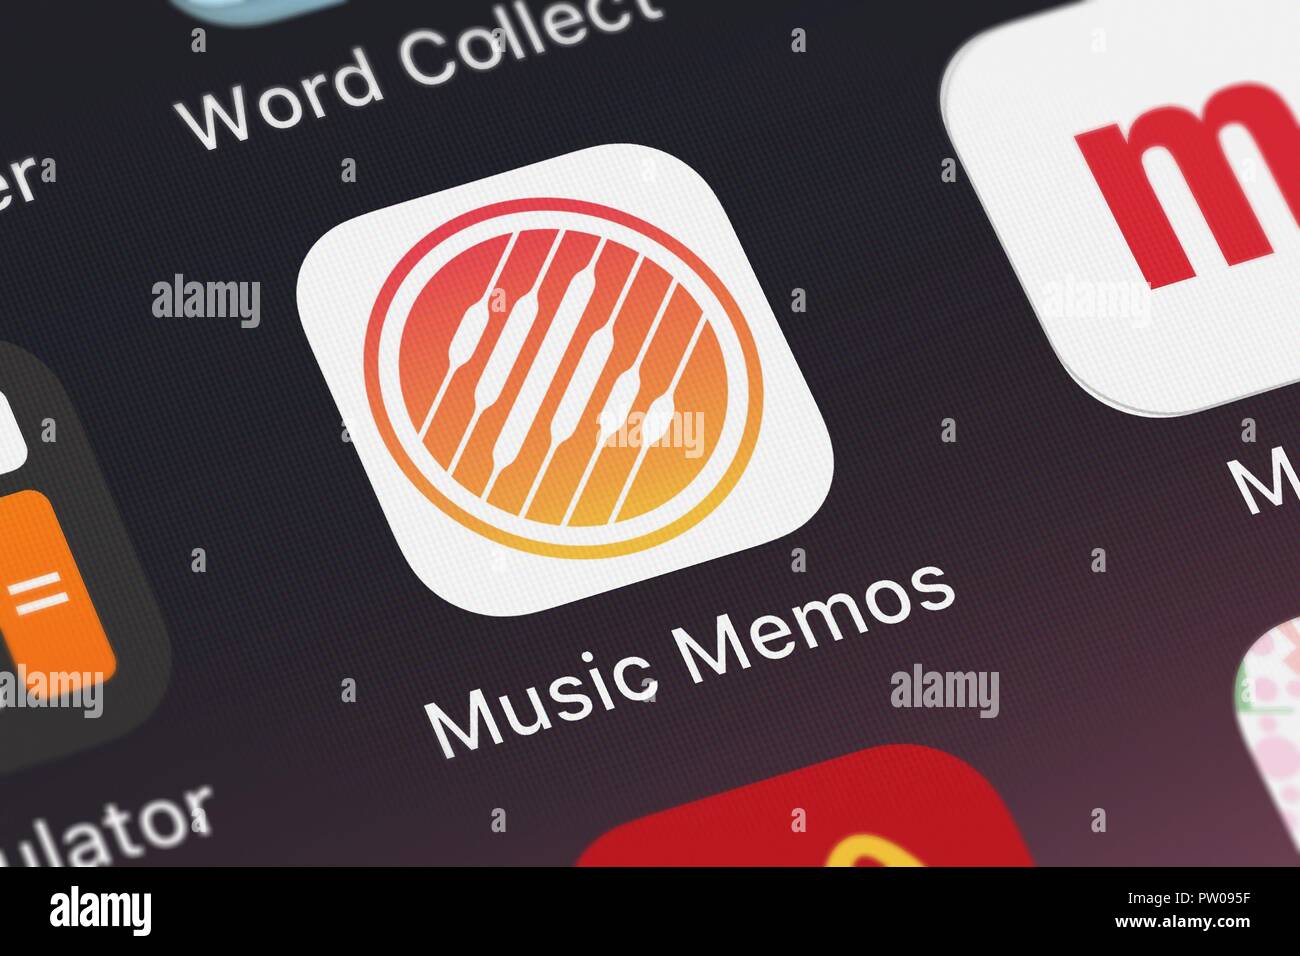 London, United Kingdom - October 11, 2018: Close-up shot of the Music Memos application icon from Apple on an iPhone. Stock Photo